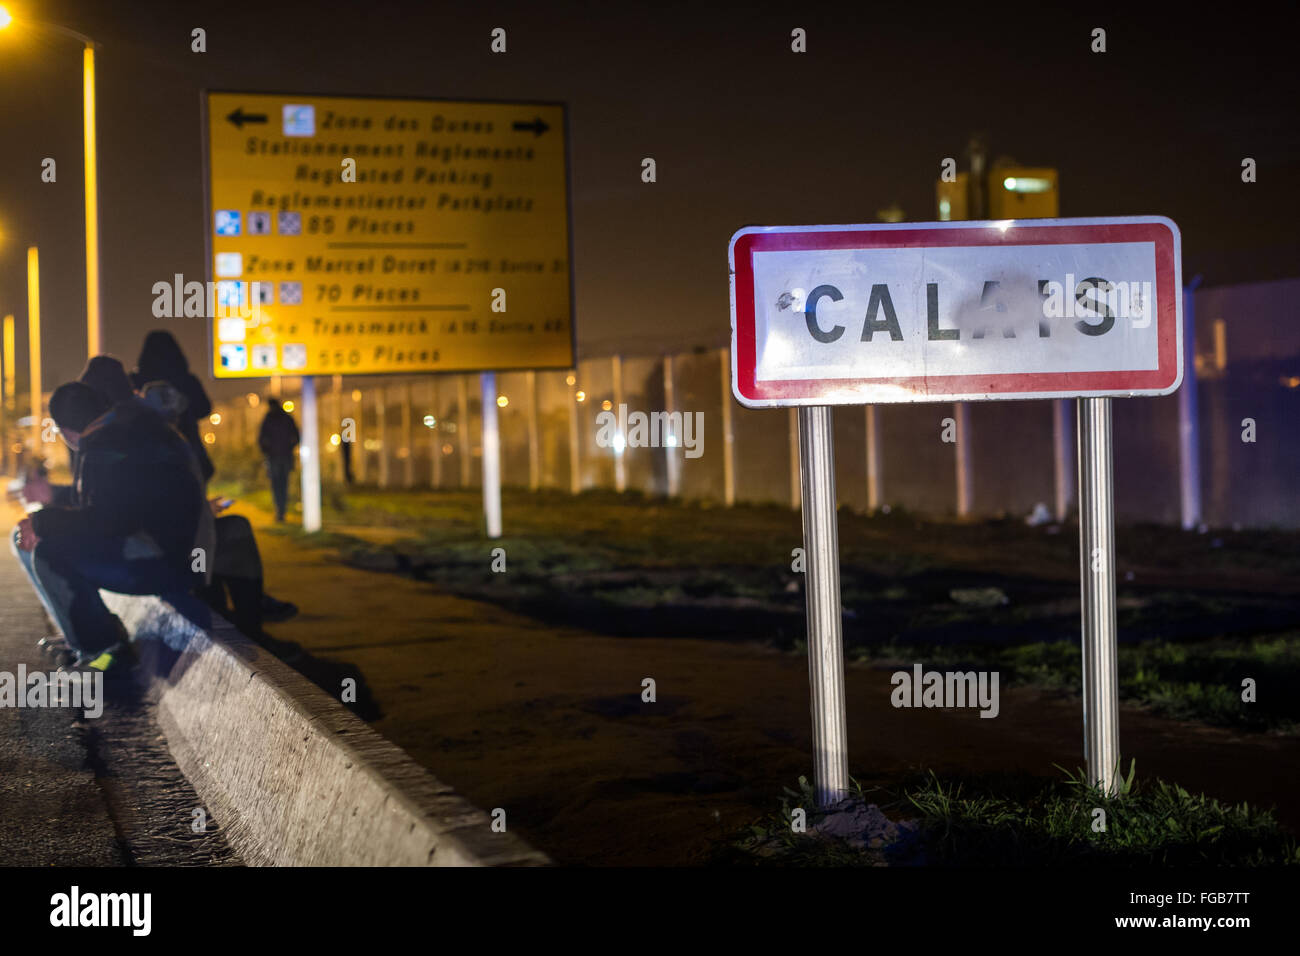 Refugees wait into the night by a Calais road sign before they leave to make an attempt at crossing into the UK via the tunnel. Stock Photo